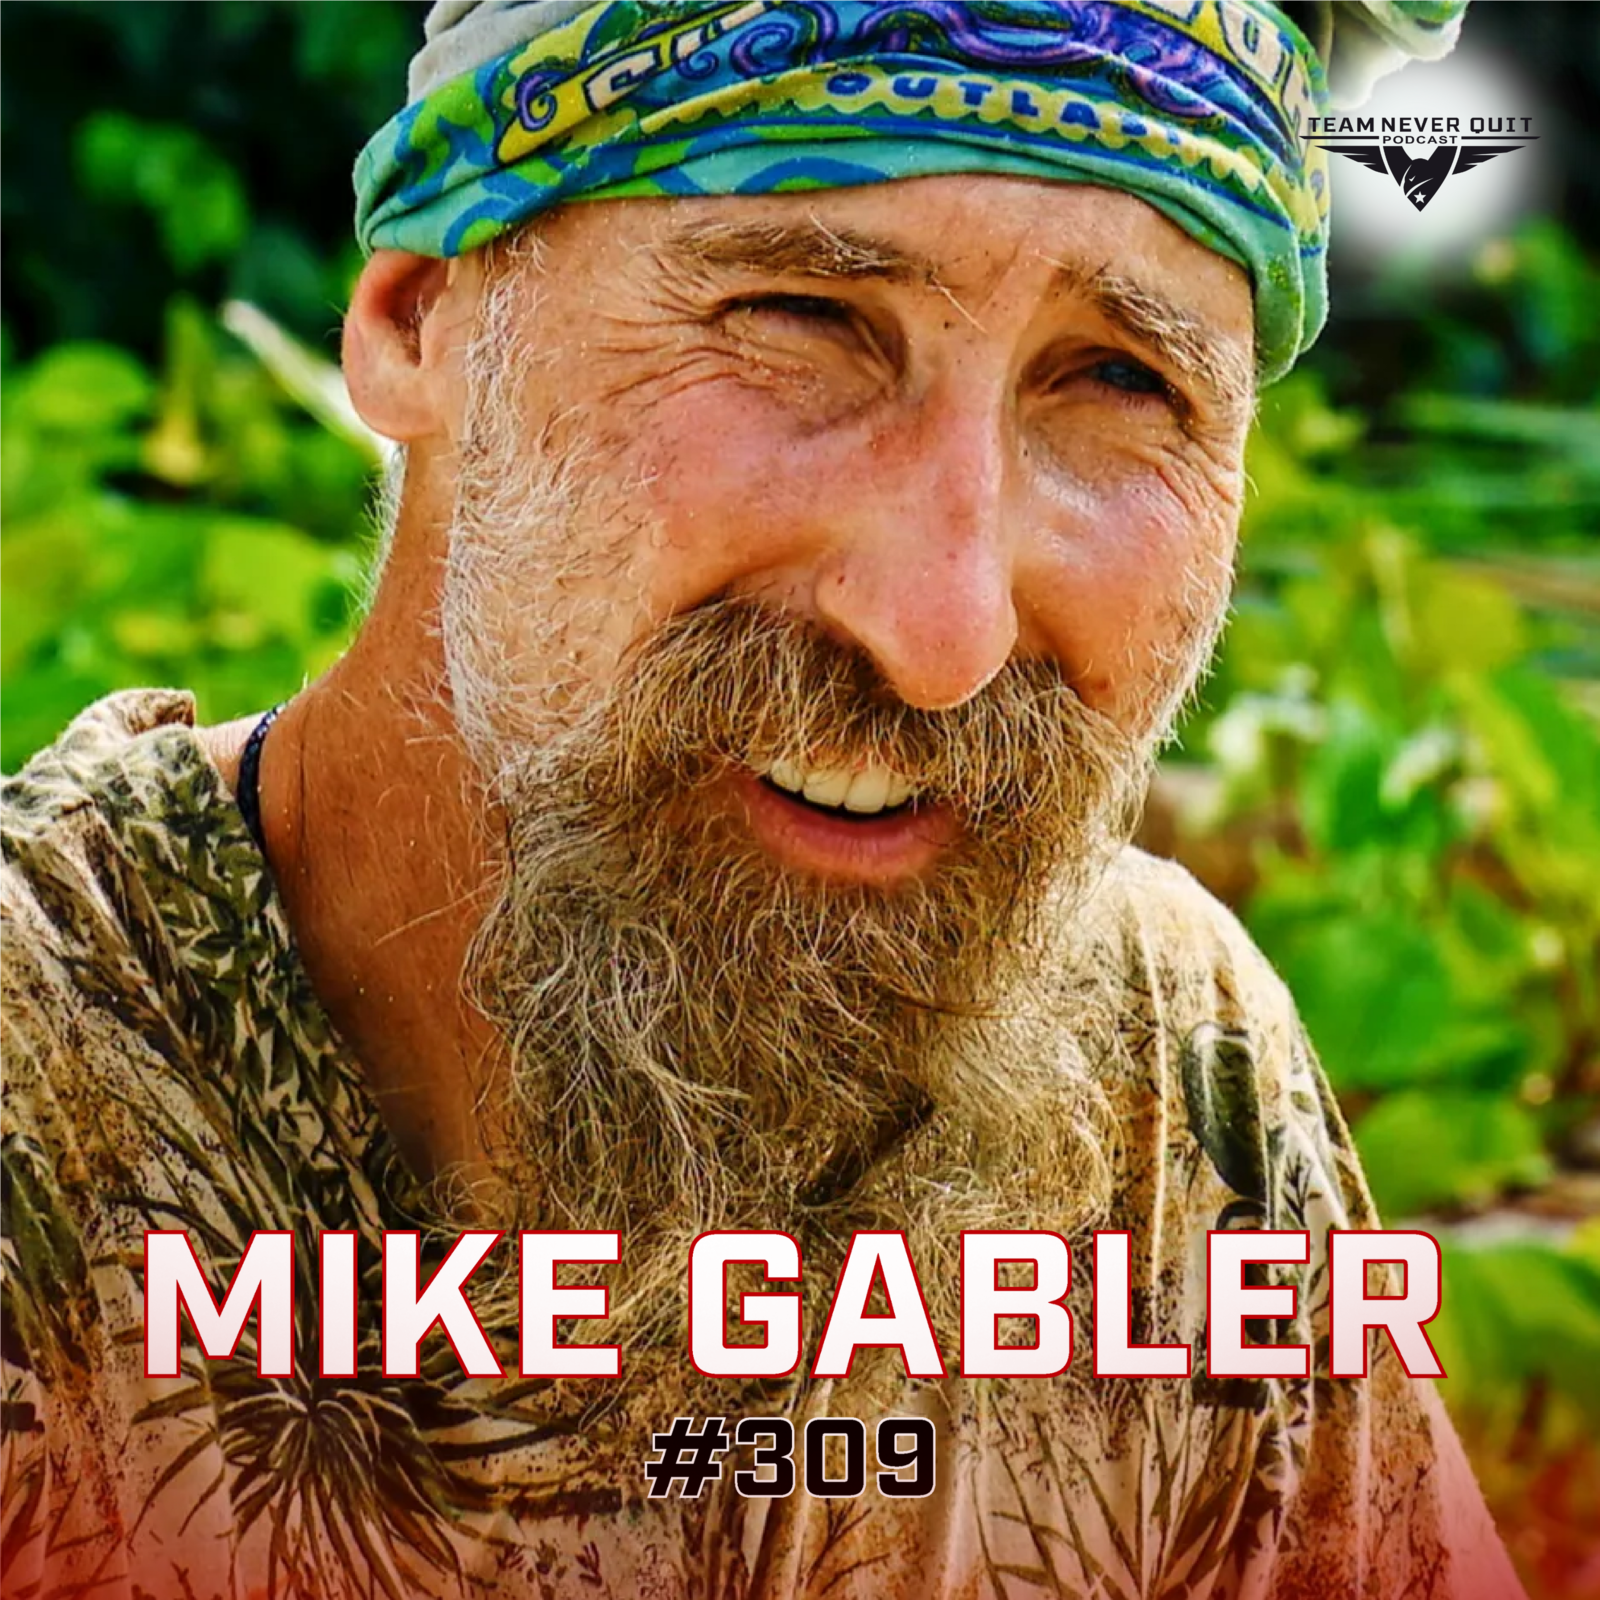 Team Never Quit / Mike Gabler On Winning "Survivor" & Donating $1M Prize To  Charity